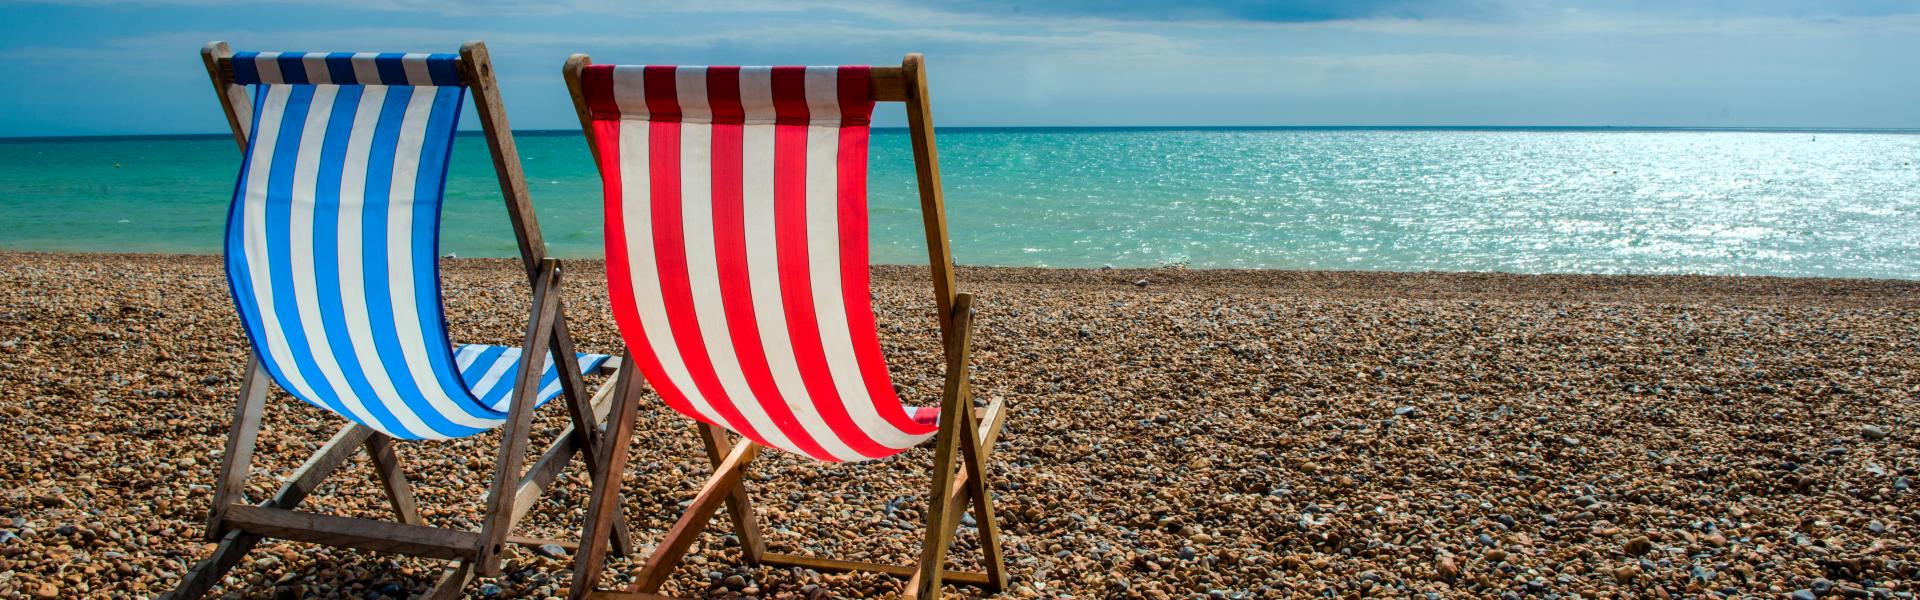 Holiday lettings & accommodation in Brighton - Wimdu